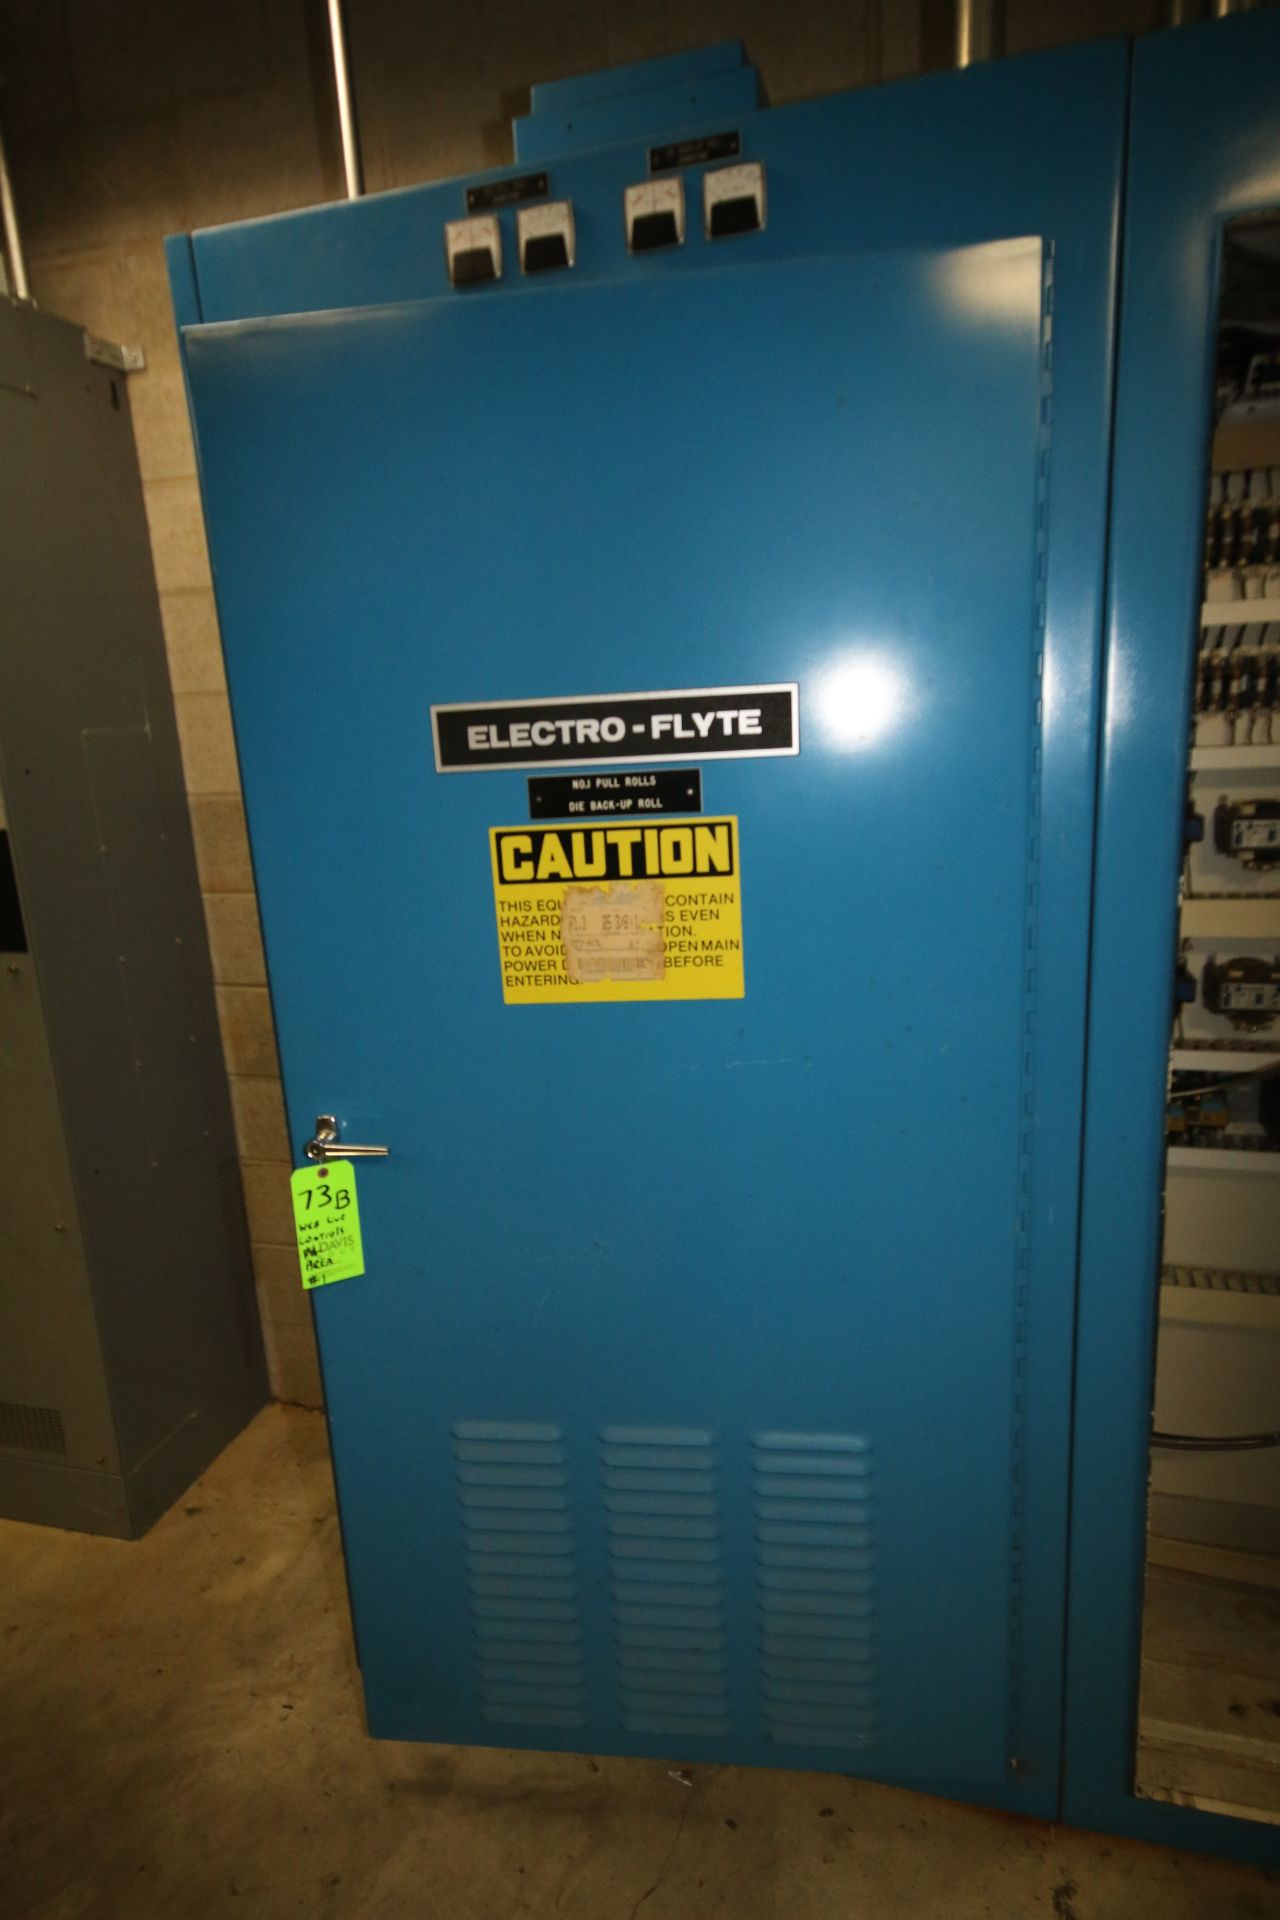 Coater Area #1 Electro-Flyte Single Door Control Panel for #1 Pull Rolls and Die Back-Up Roll